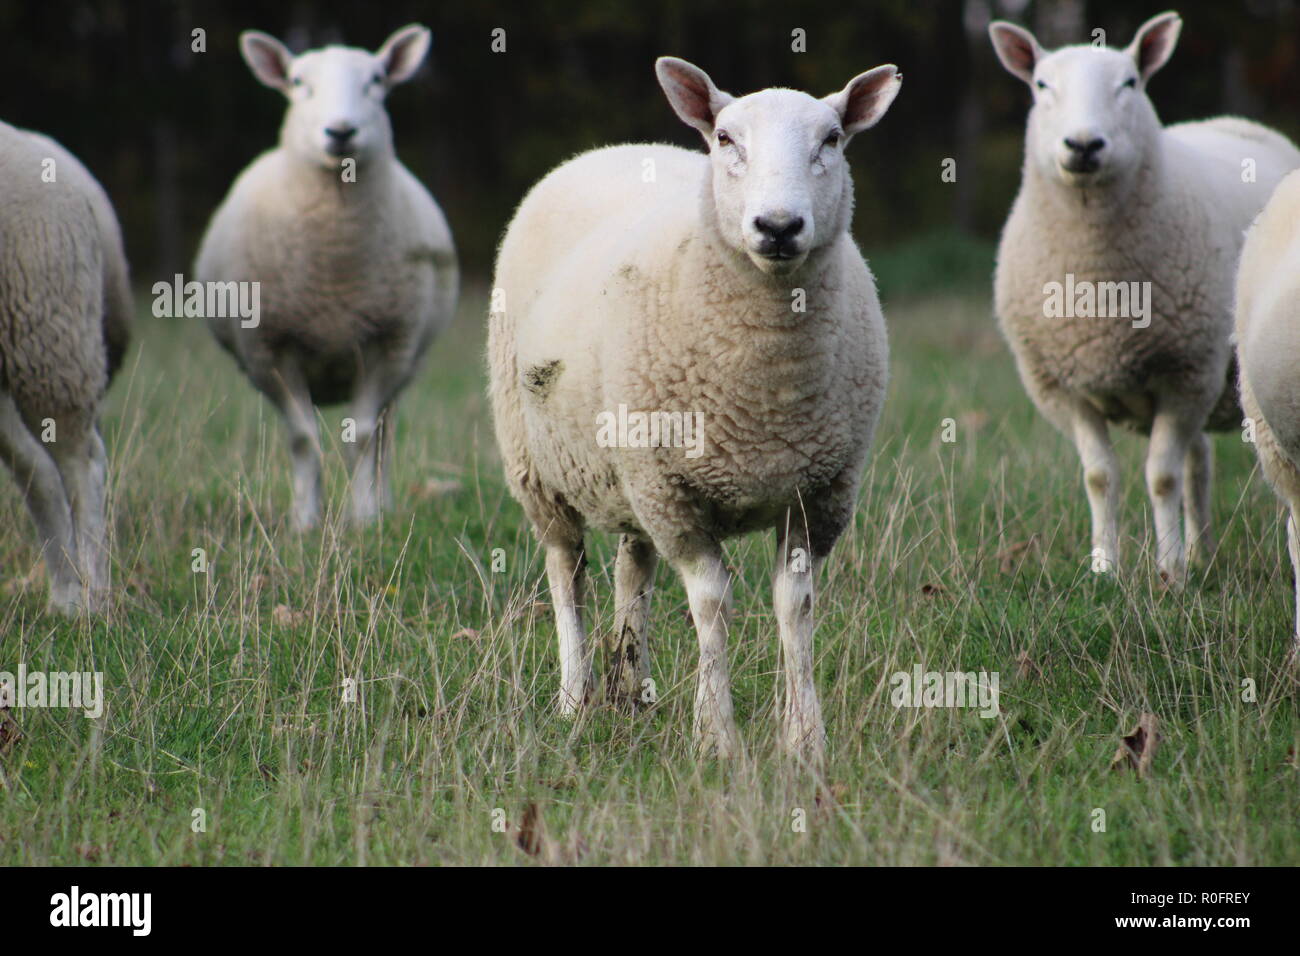 A flock/ herd of sheep grazing in a field in Yorkshire, Britain in the UK Stock Photo